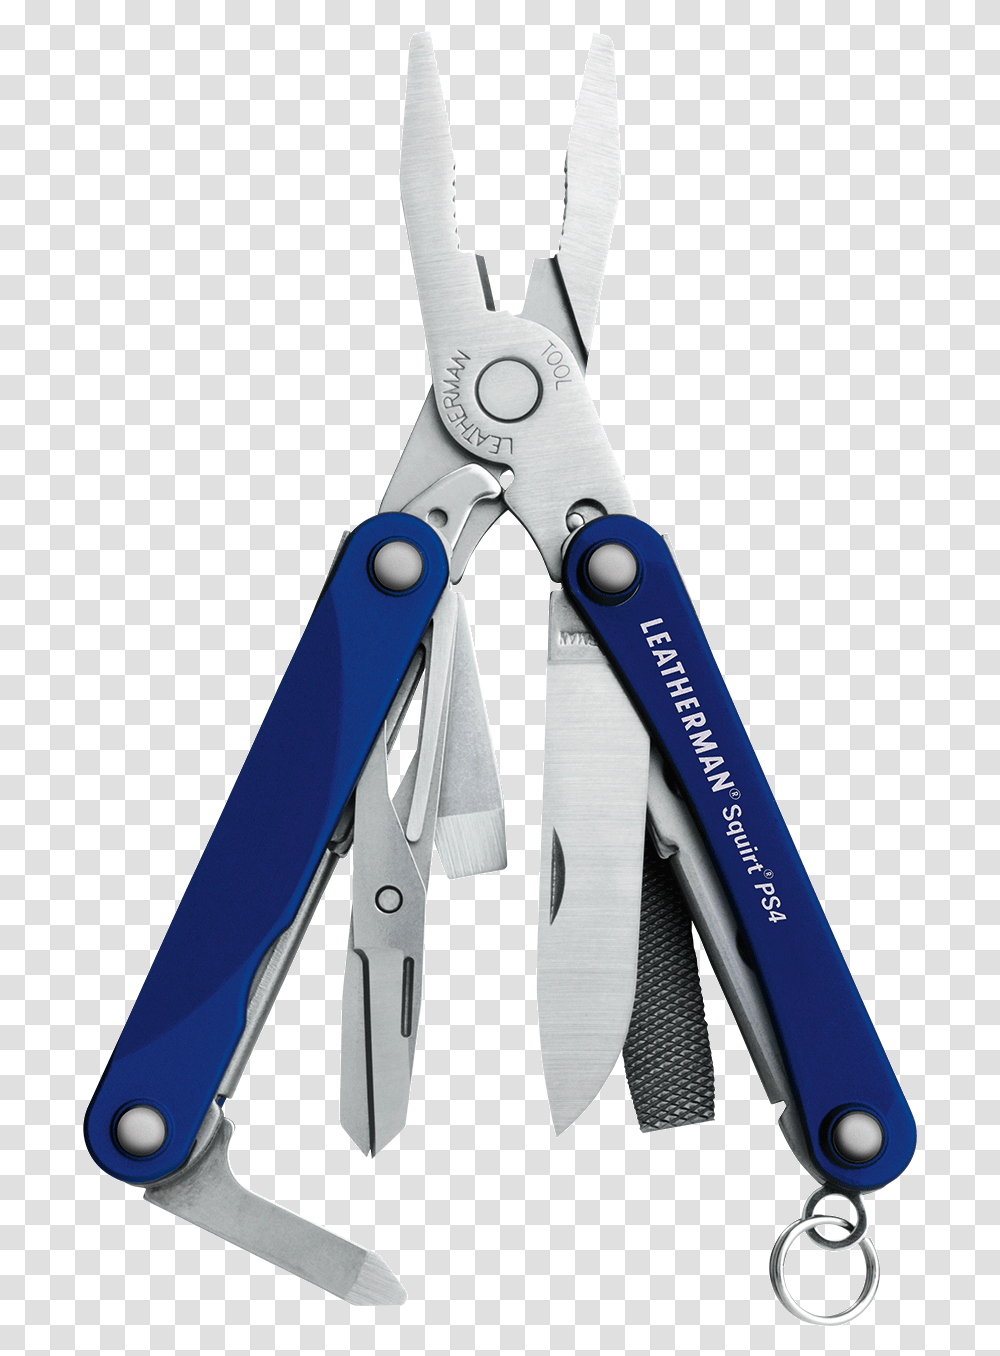 Squirt Ps4 Multitool Blue Leatherman Squirt, Scissors, Blade, Weapon, Weaponry Transparent Png